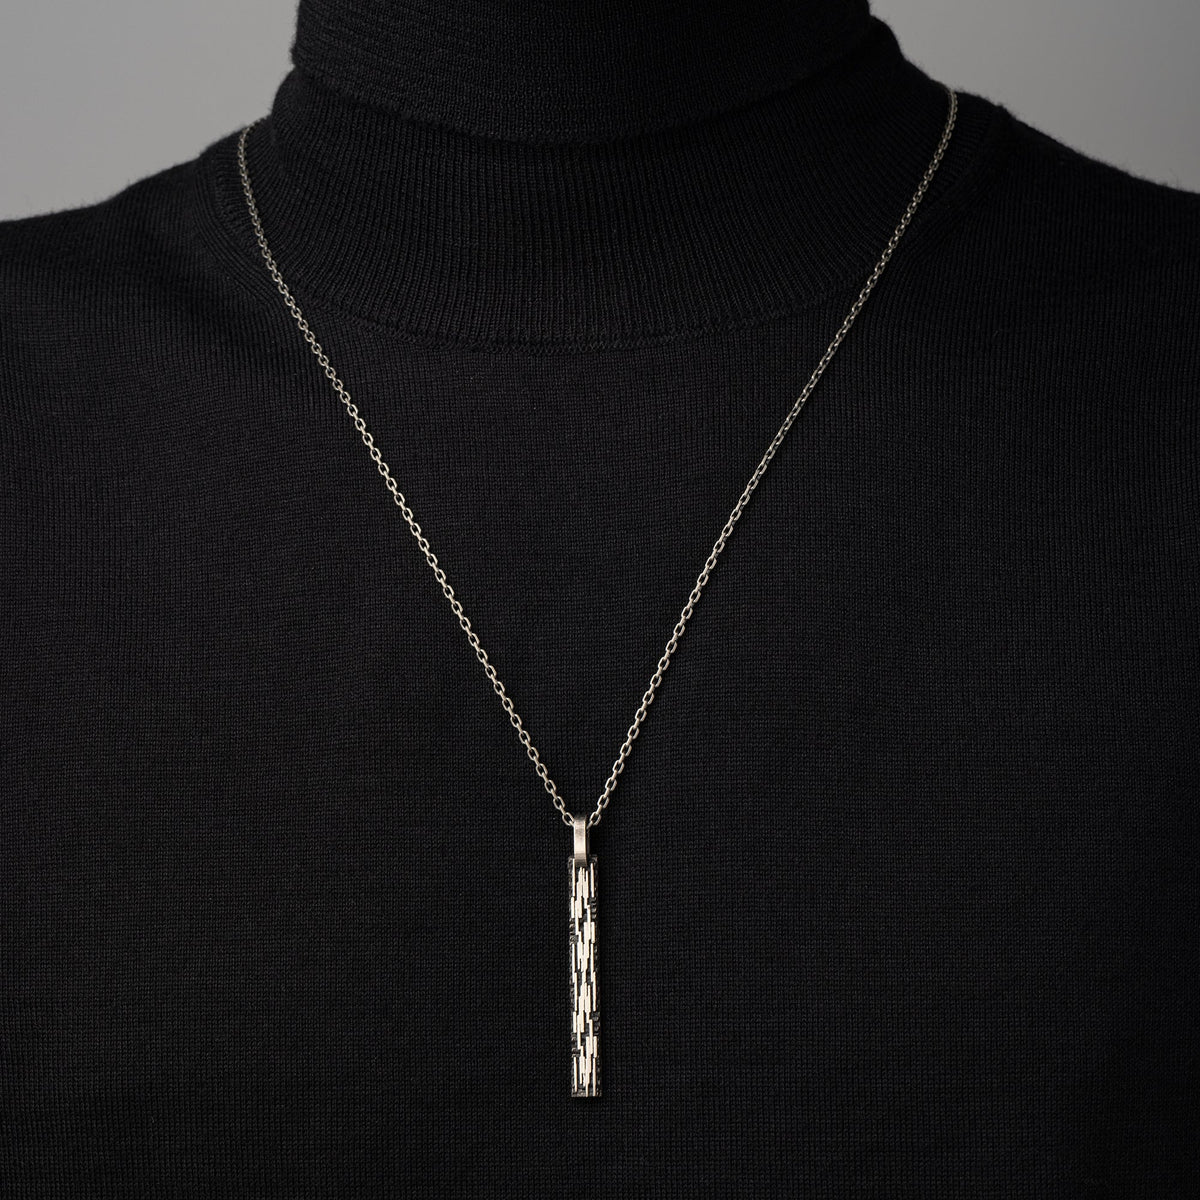 AST-006 Necklace